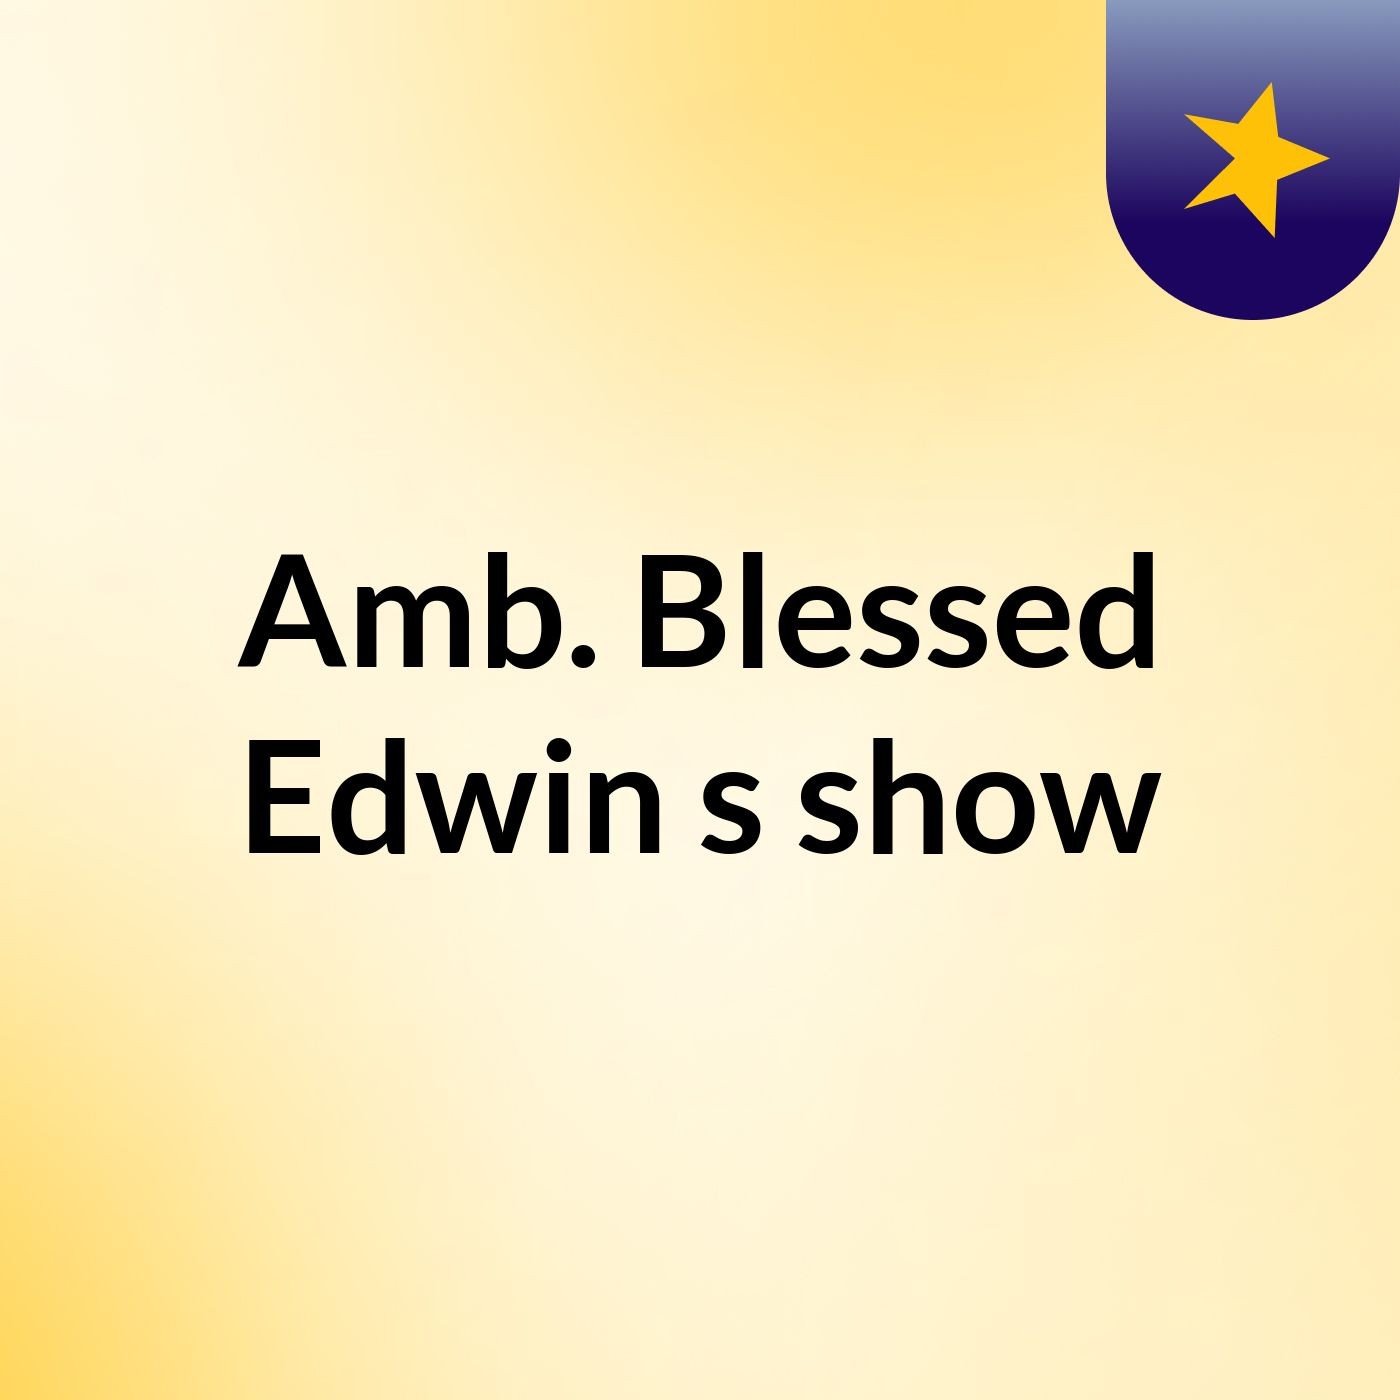 Amb. Blessed Edwin's show